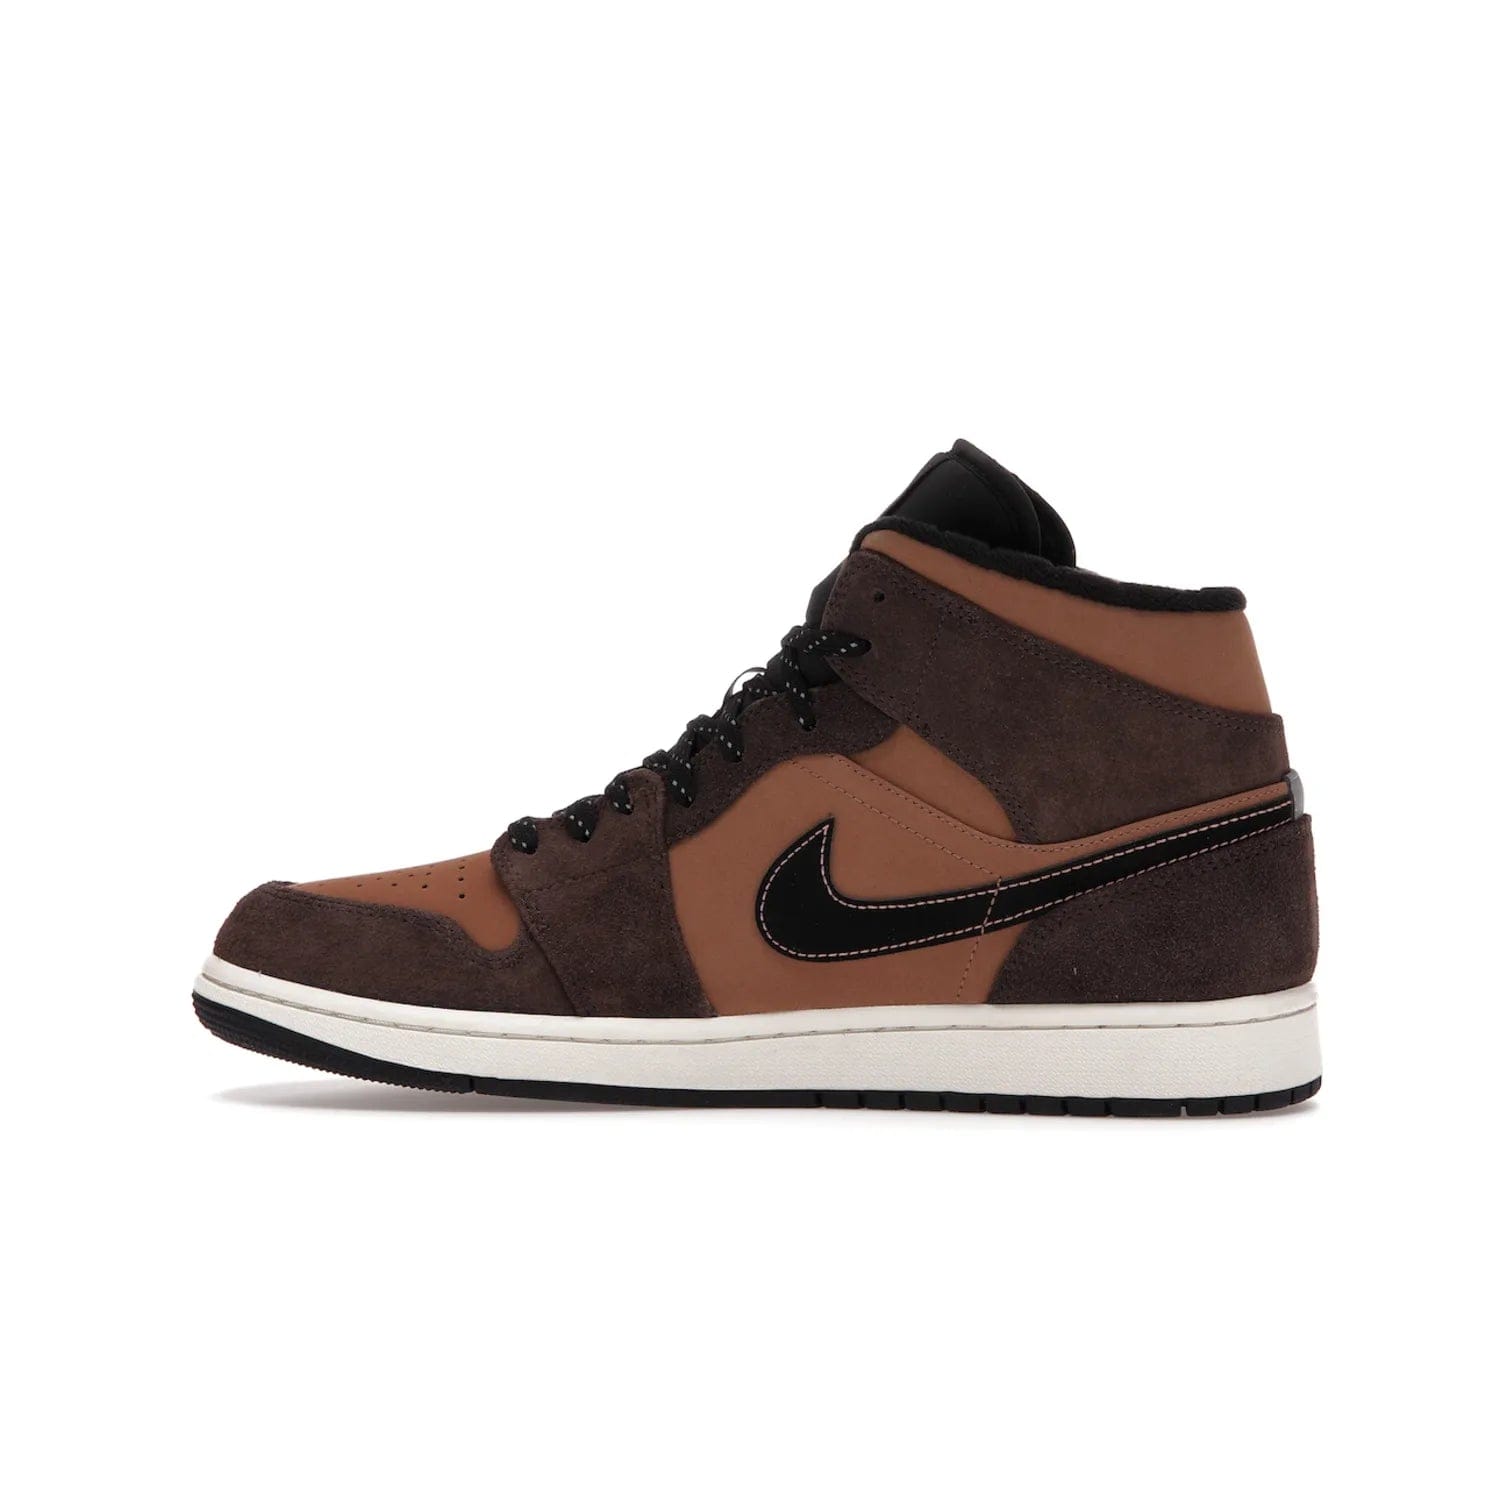 Jordan 1 Mid SE Dark Chocolate - Image 20 - Only at www.BallersClubKickz.com - This fashionable and functional Jordan 1 Mid SE Dark Chocolate features a light brown Durabuck upper, dark brown suede overlays, black Swoosh logos and reflective patch at heel. A must-have for any sneakerhead!